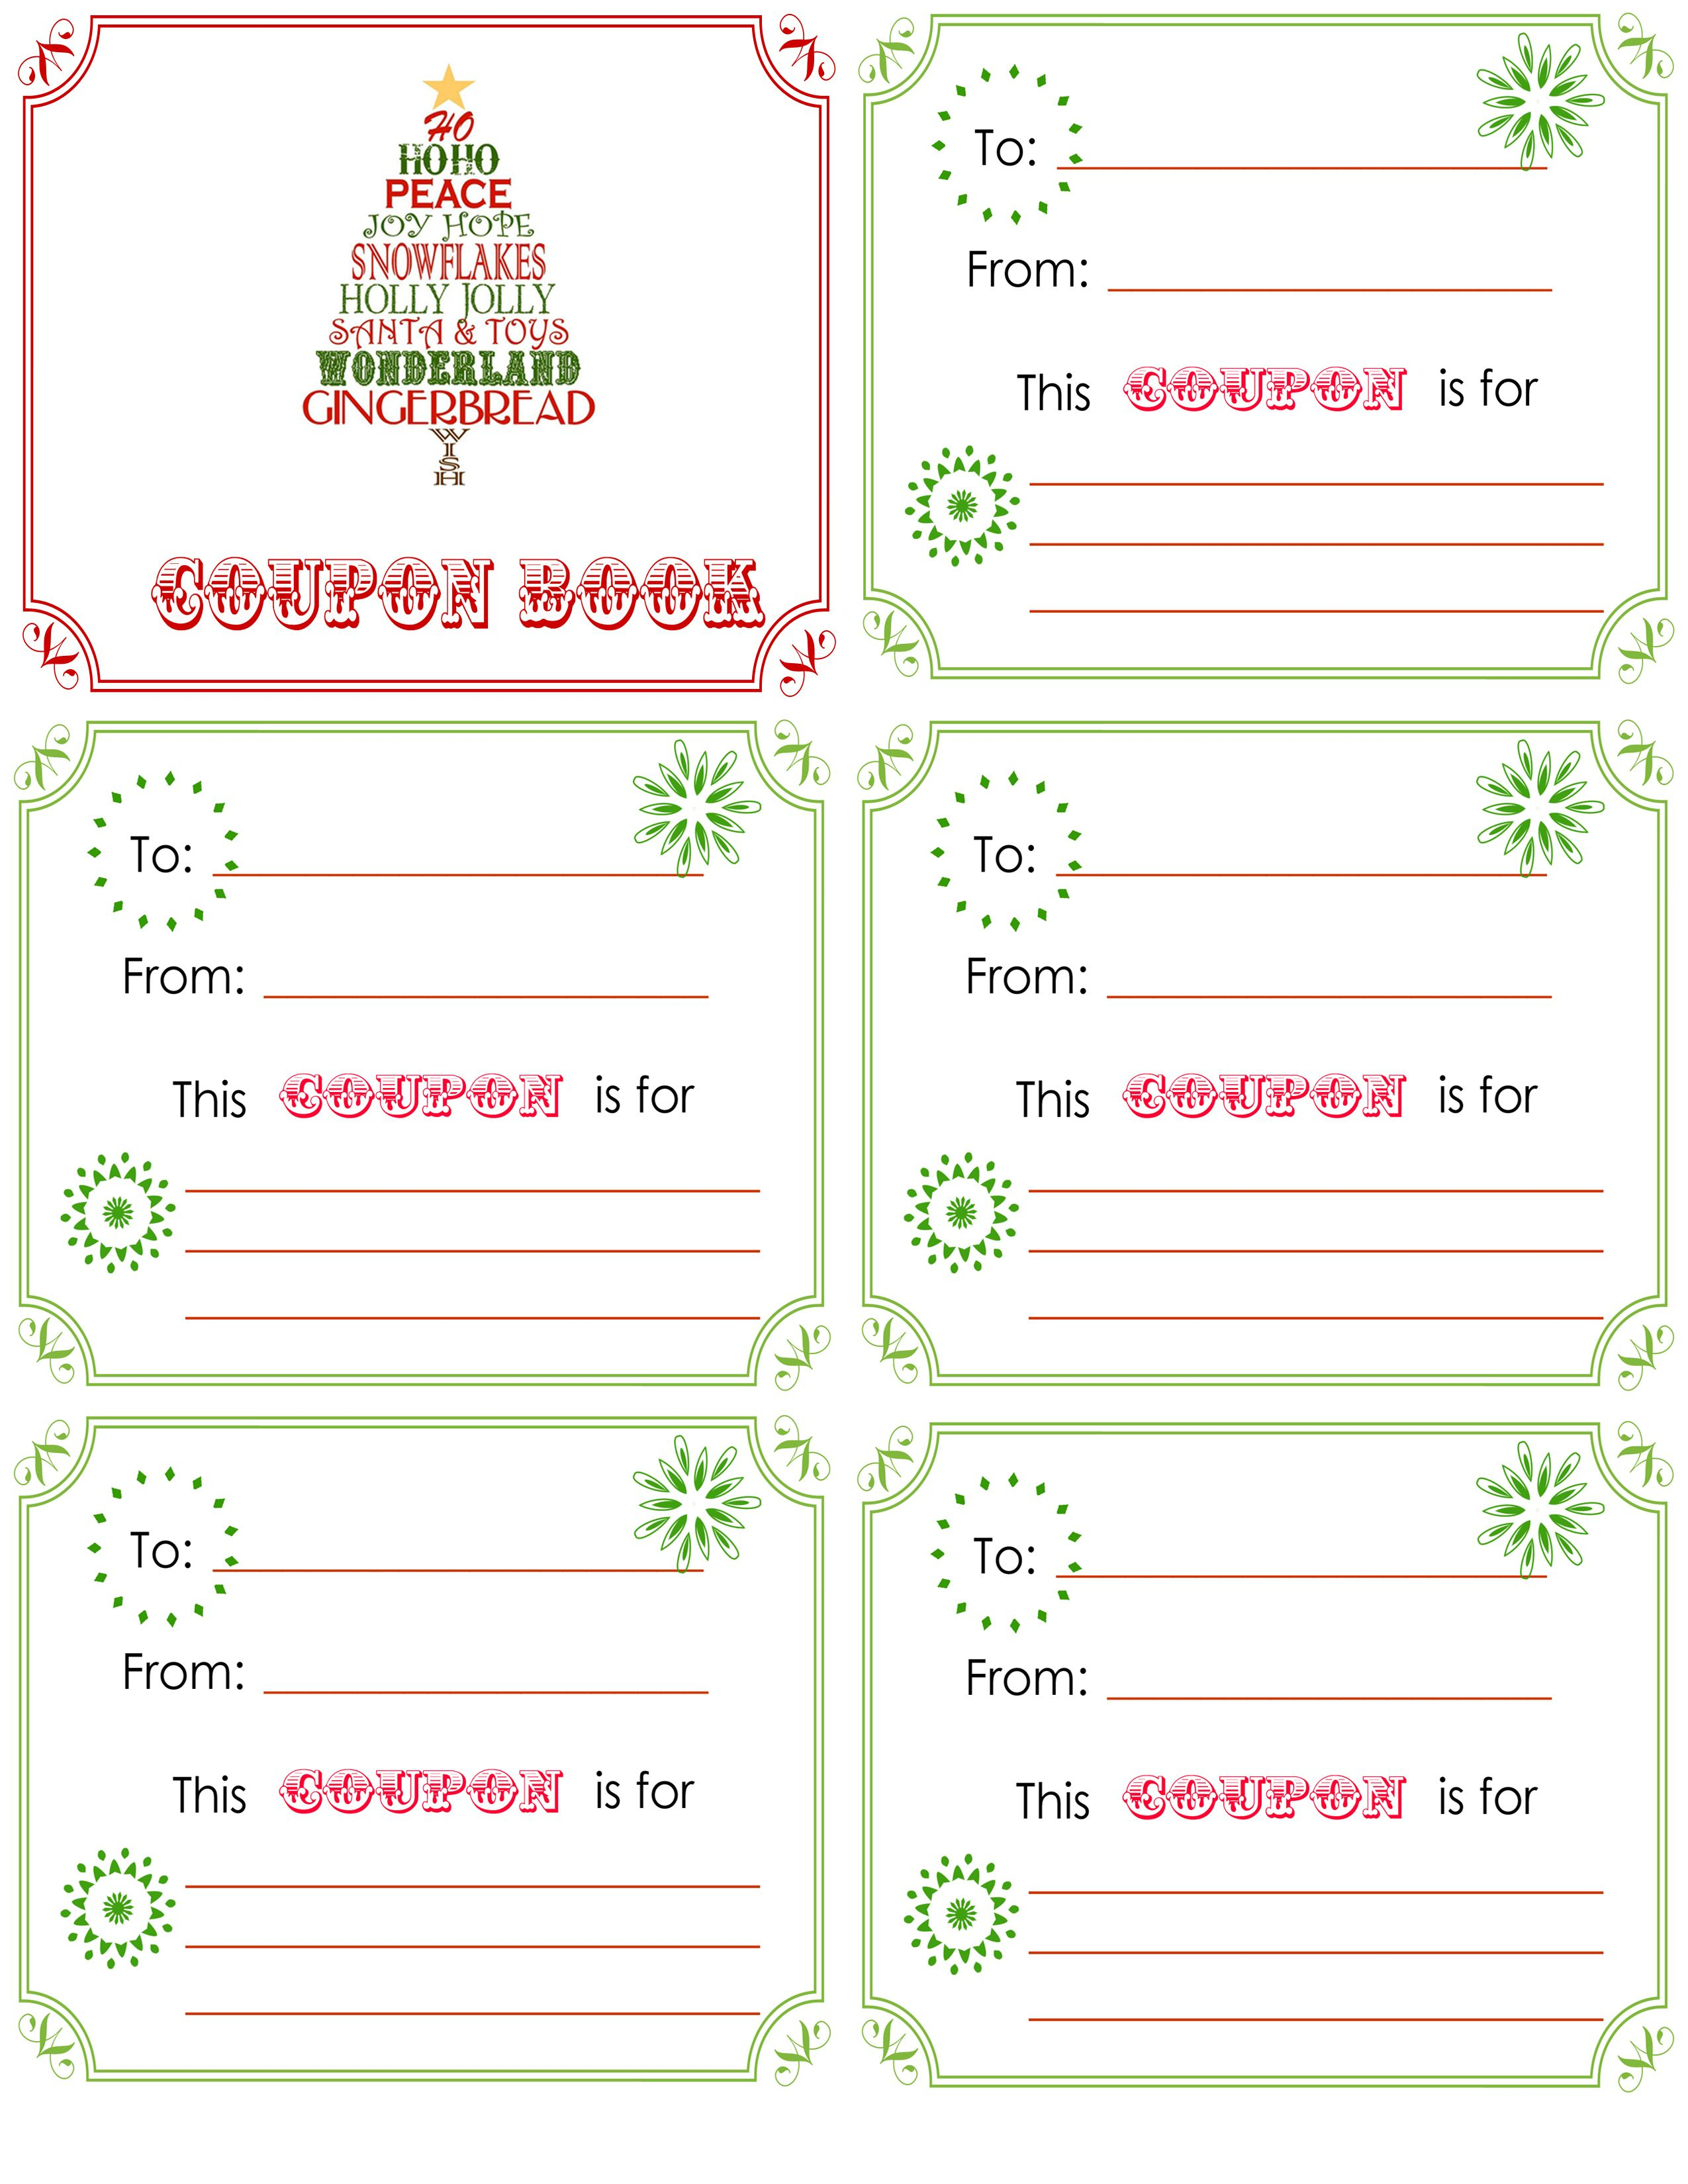 Printable Christmas Coupon Book. L Is Getting 15 Minute Added To - Free Printable Homemade Coupon Book